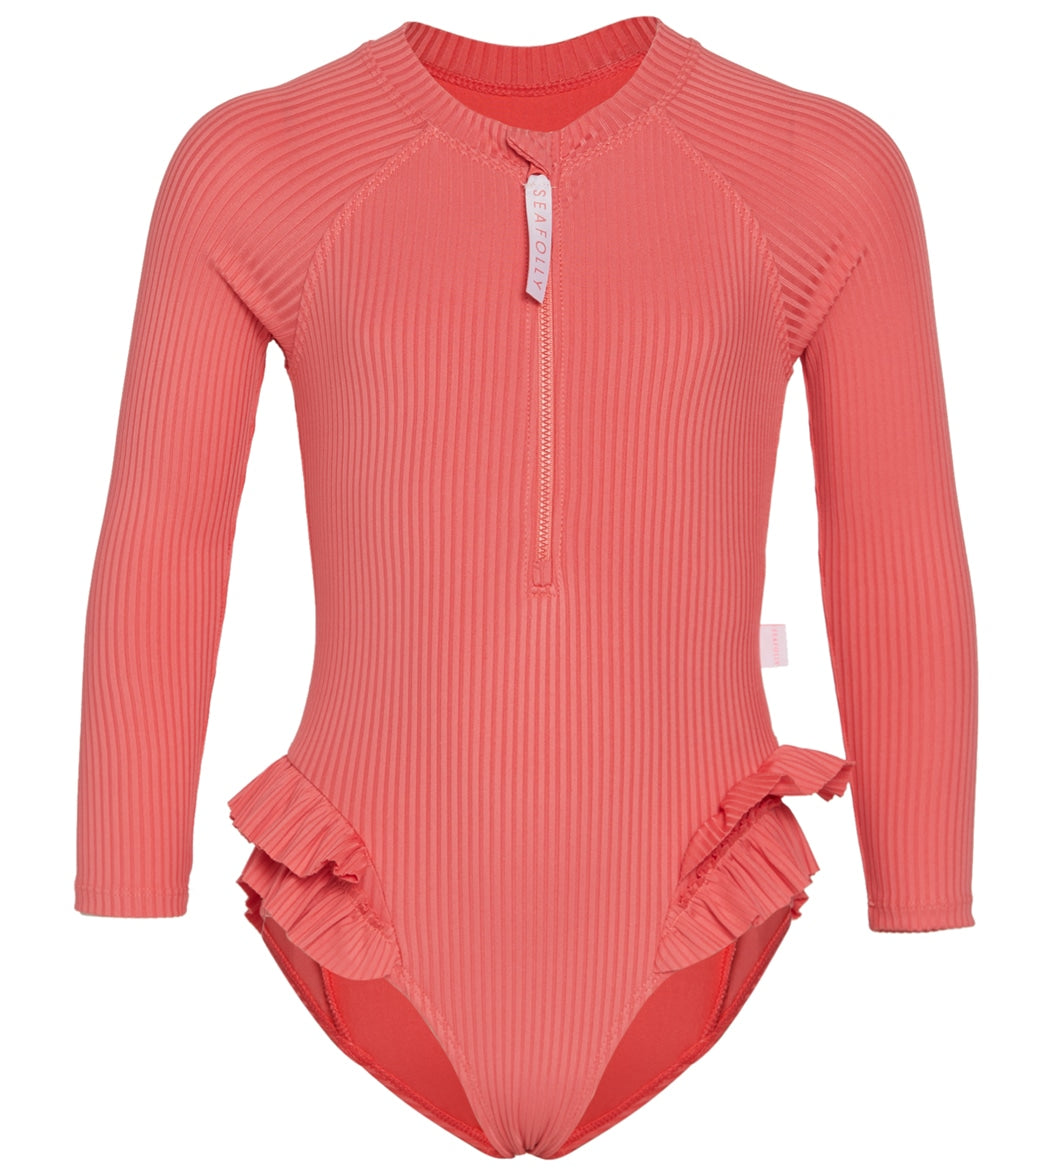 Seafolly Girls Summer Essentials Long Sleeve One Piece Swimsuit (Baby, Toddler, Little Kid)